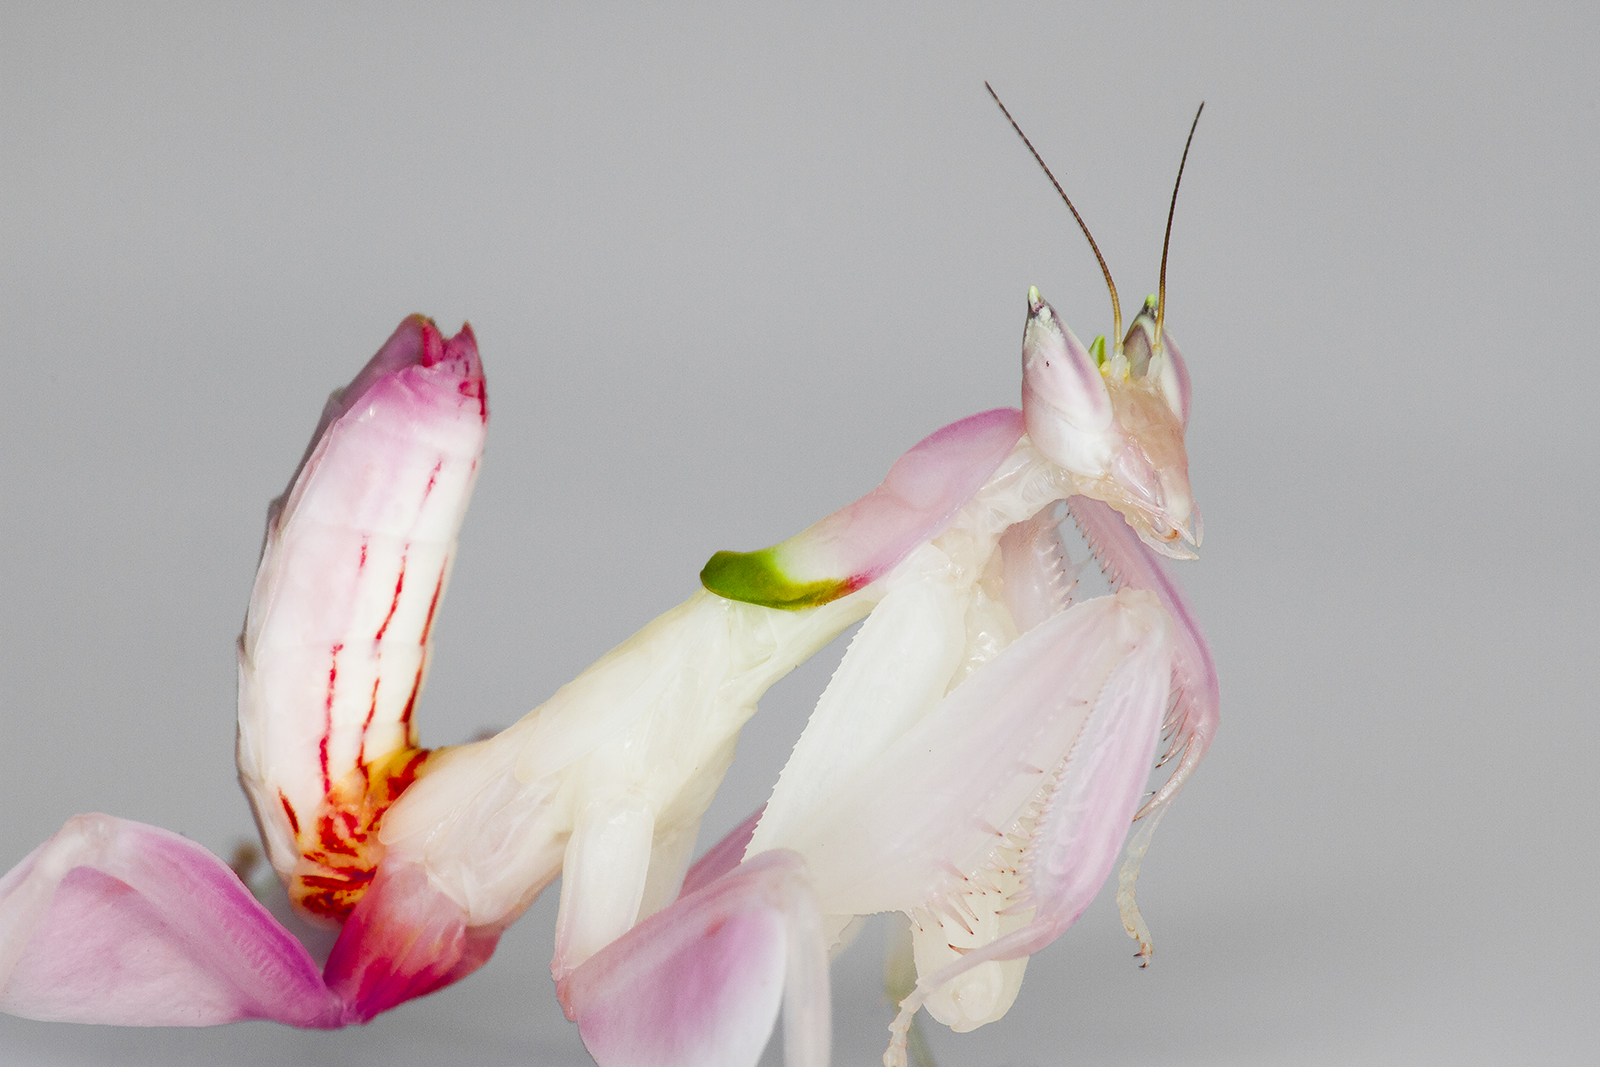 Orchid Mantis Hymenopus Coronatus For Sale Buy Orchid Mantis Nymphs Ootheca Insectstore Orchid Mantis For Sale Uk,Red Fox Pet Price